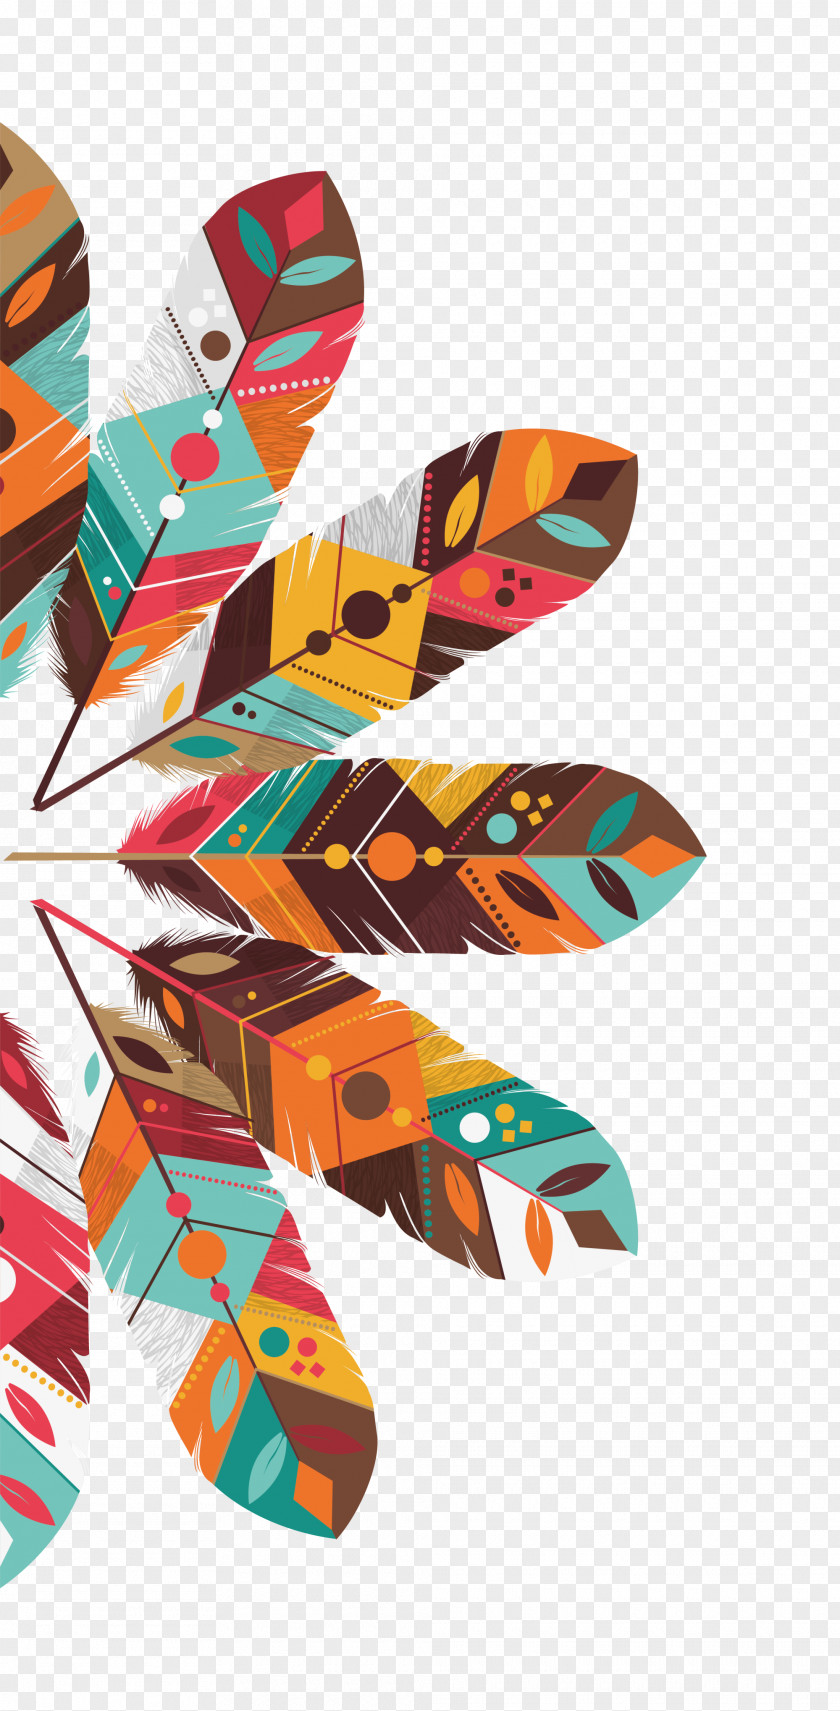 Colored Indian Feather Boho-chic Euclidean Vector Illustration PNG